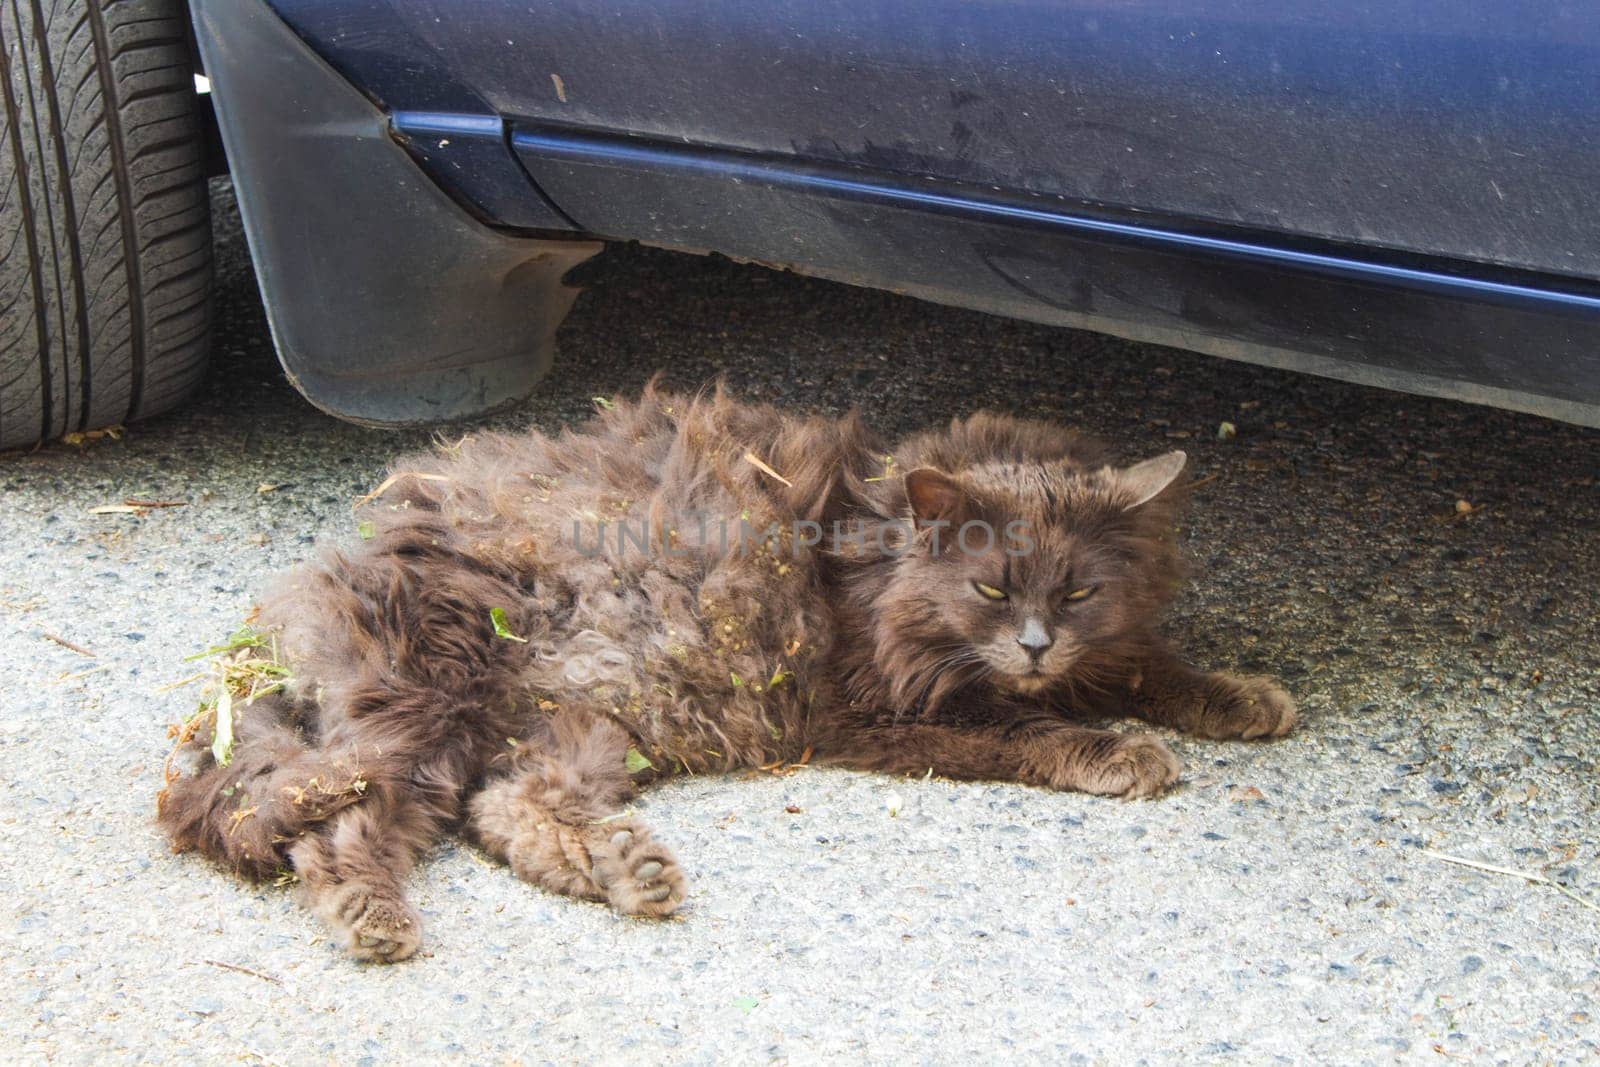 A curious cat, dusty and nestled beneath a car, adorned with remnants of plant treasures, embodies the spirit of feline exploration amidst urban and natural worlds